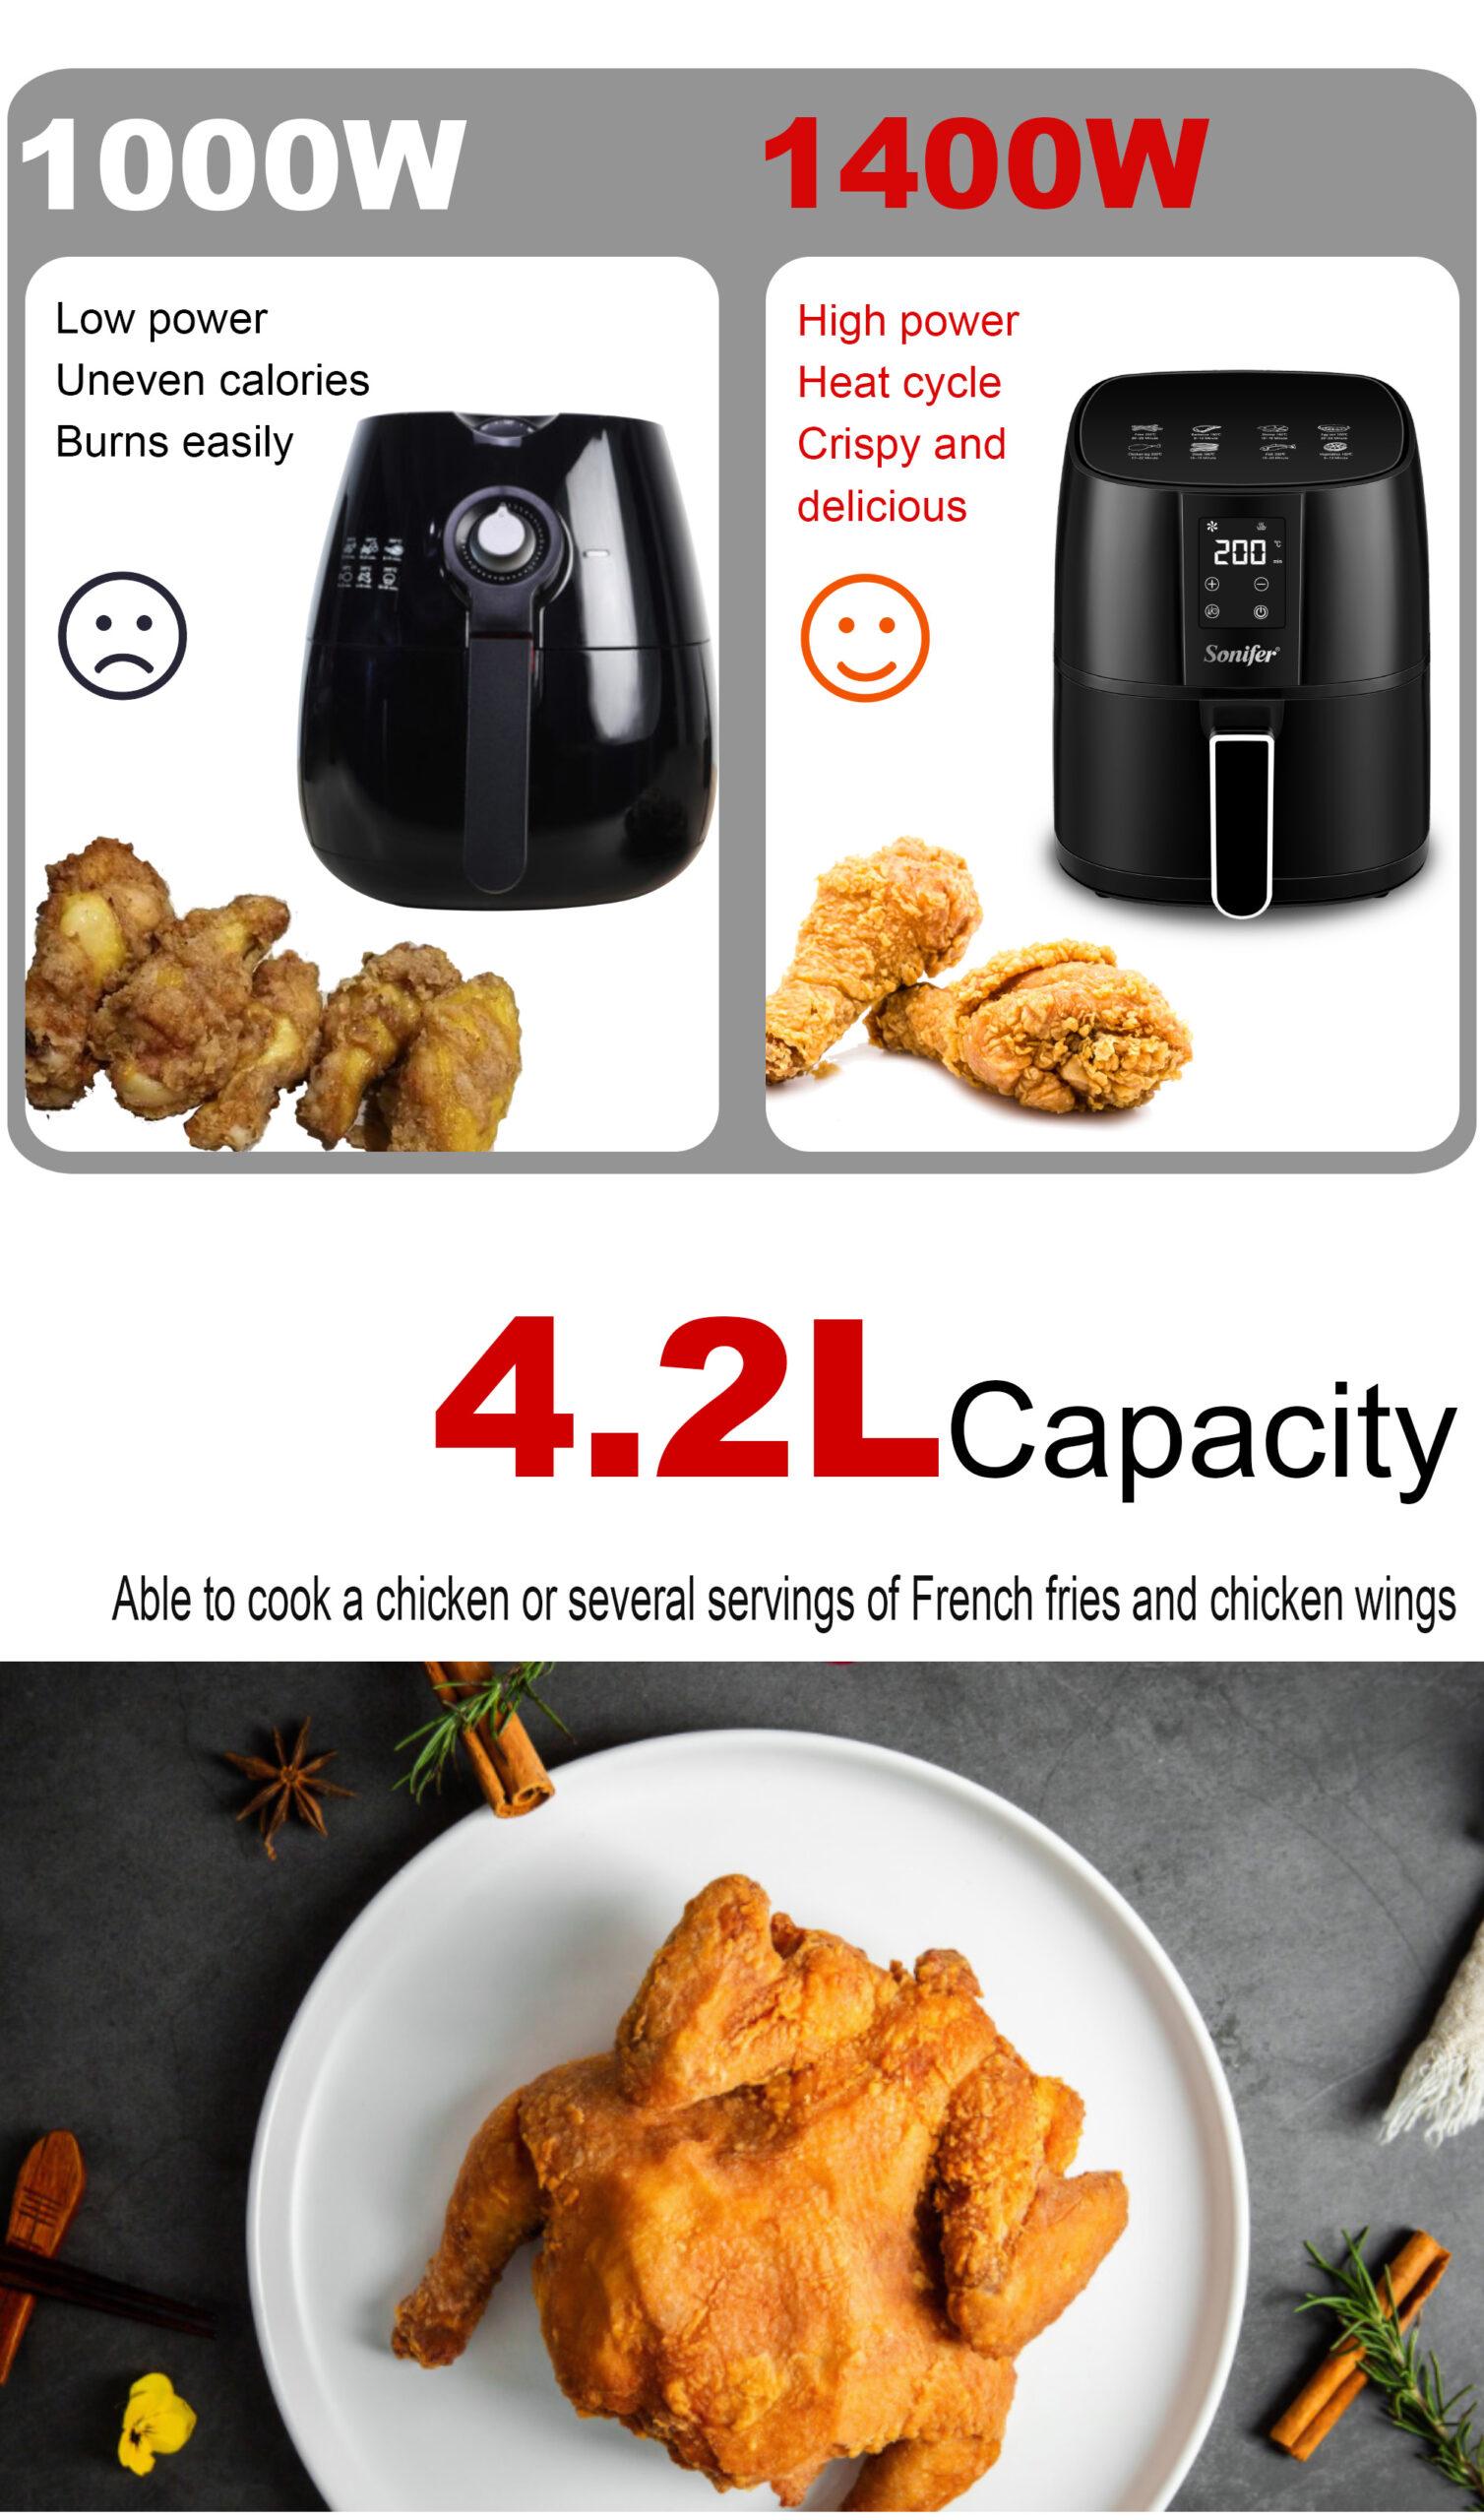 Sonifer 4.2L Air Fryer Without Oil Oven 360°Baking LED Touchscreen Electric Deep Fryer 1400W Nonstick Basket Kitchen Cooking Fry